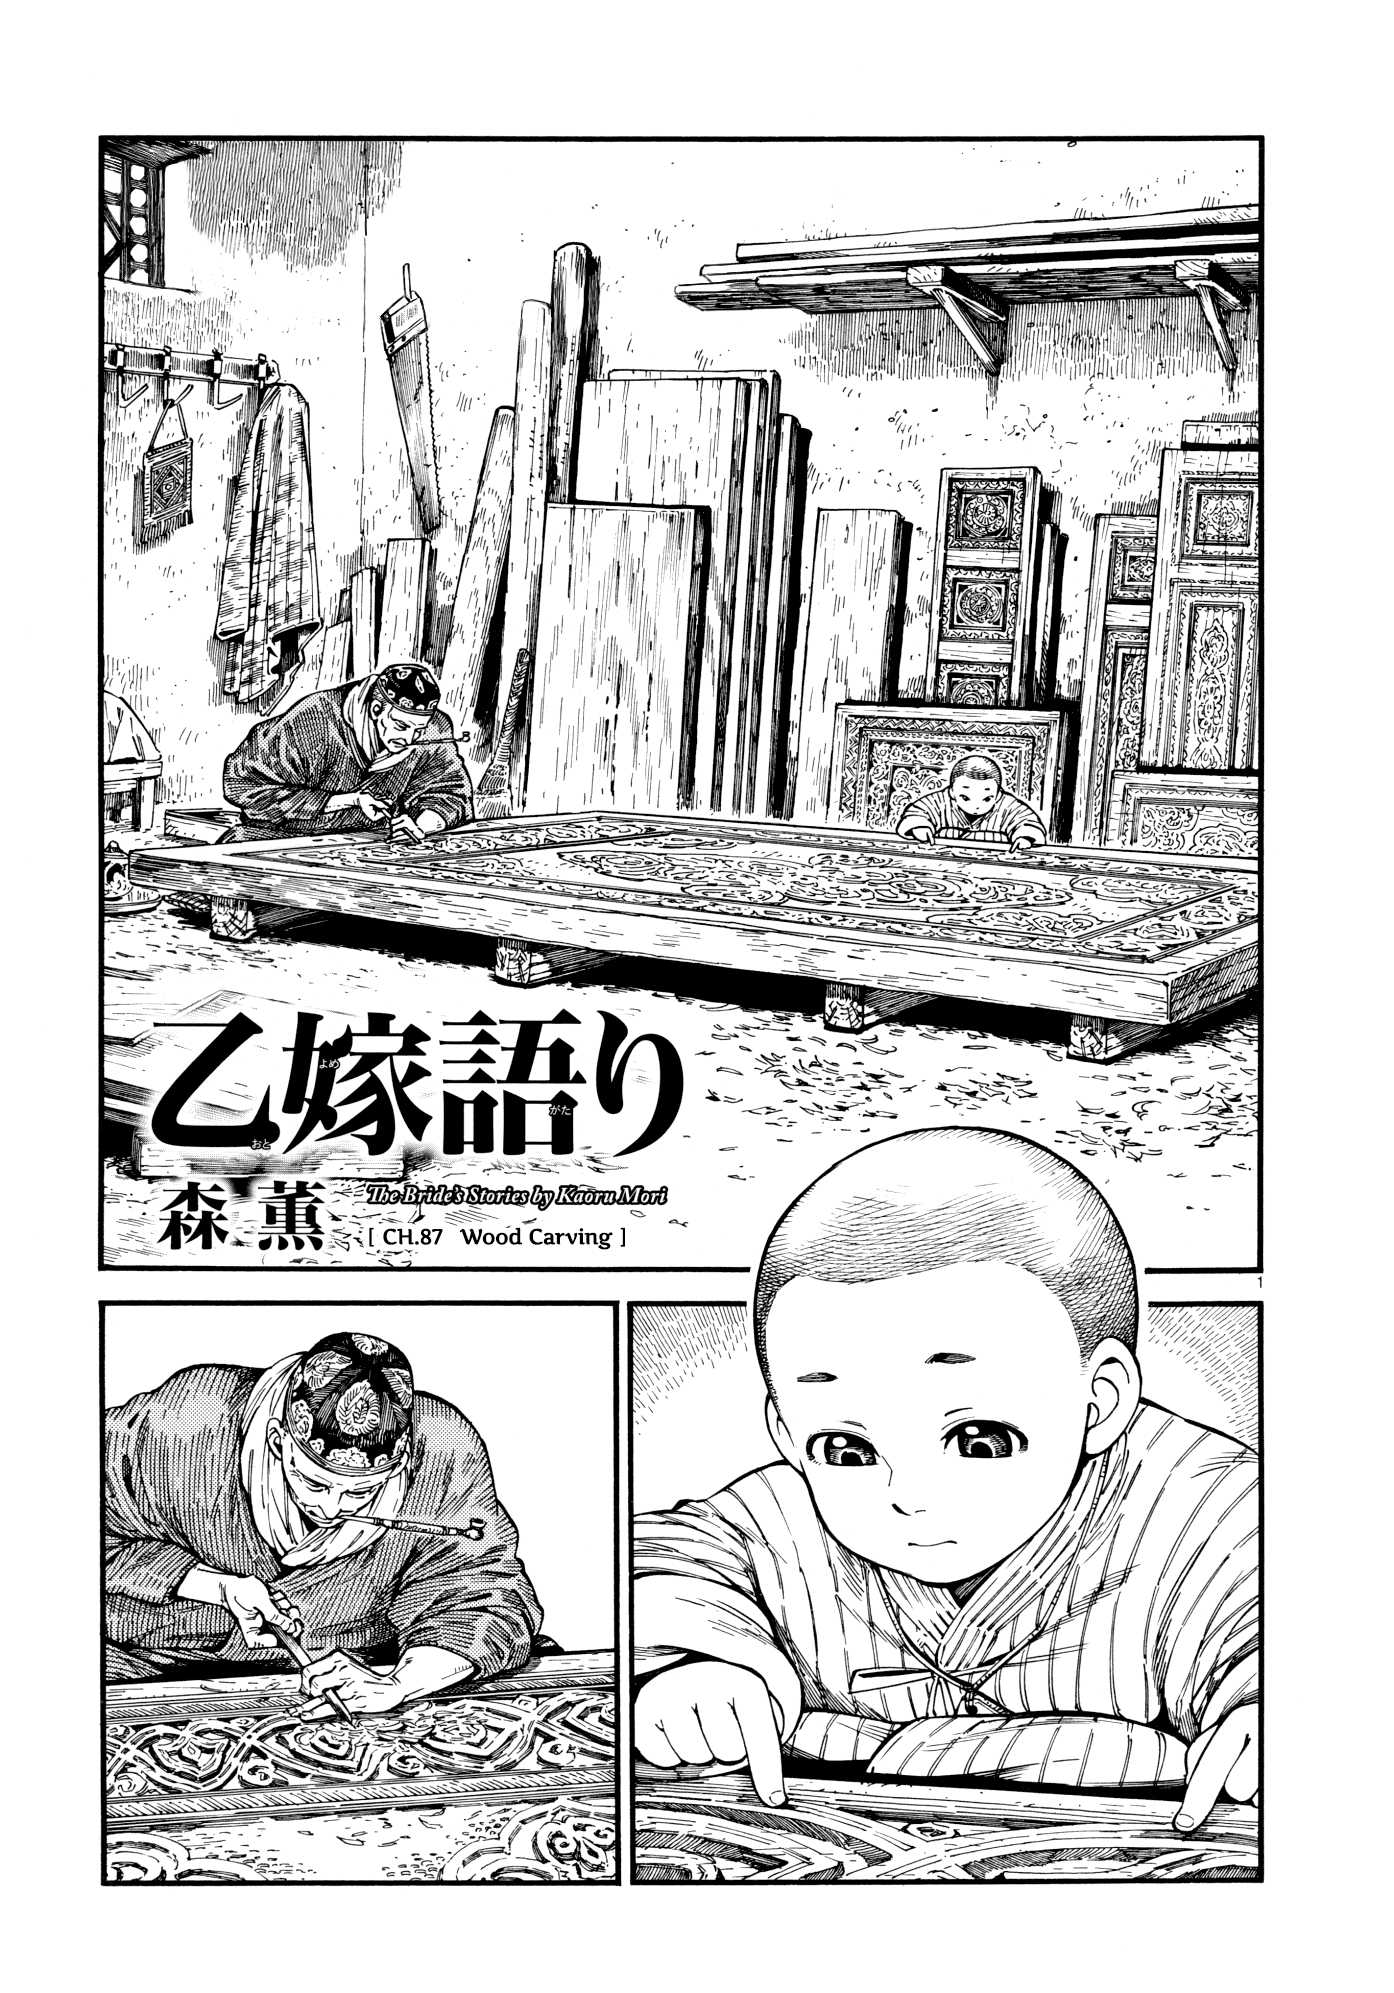 Otoyomegatari Chapter 87: Wood Carving - Picture 1